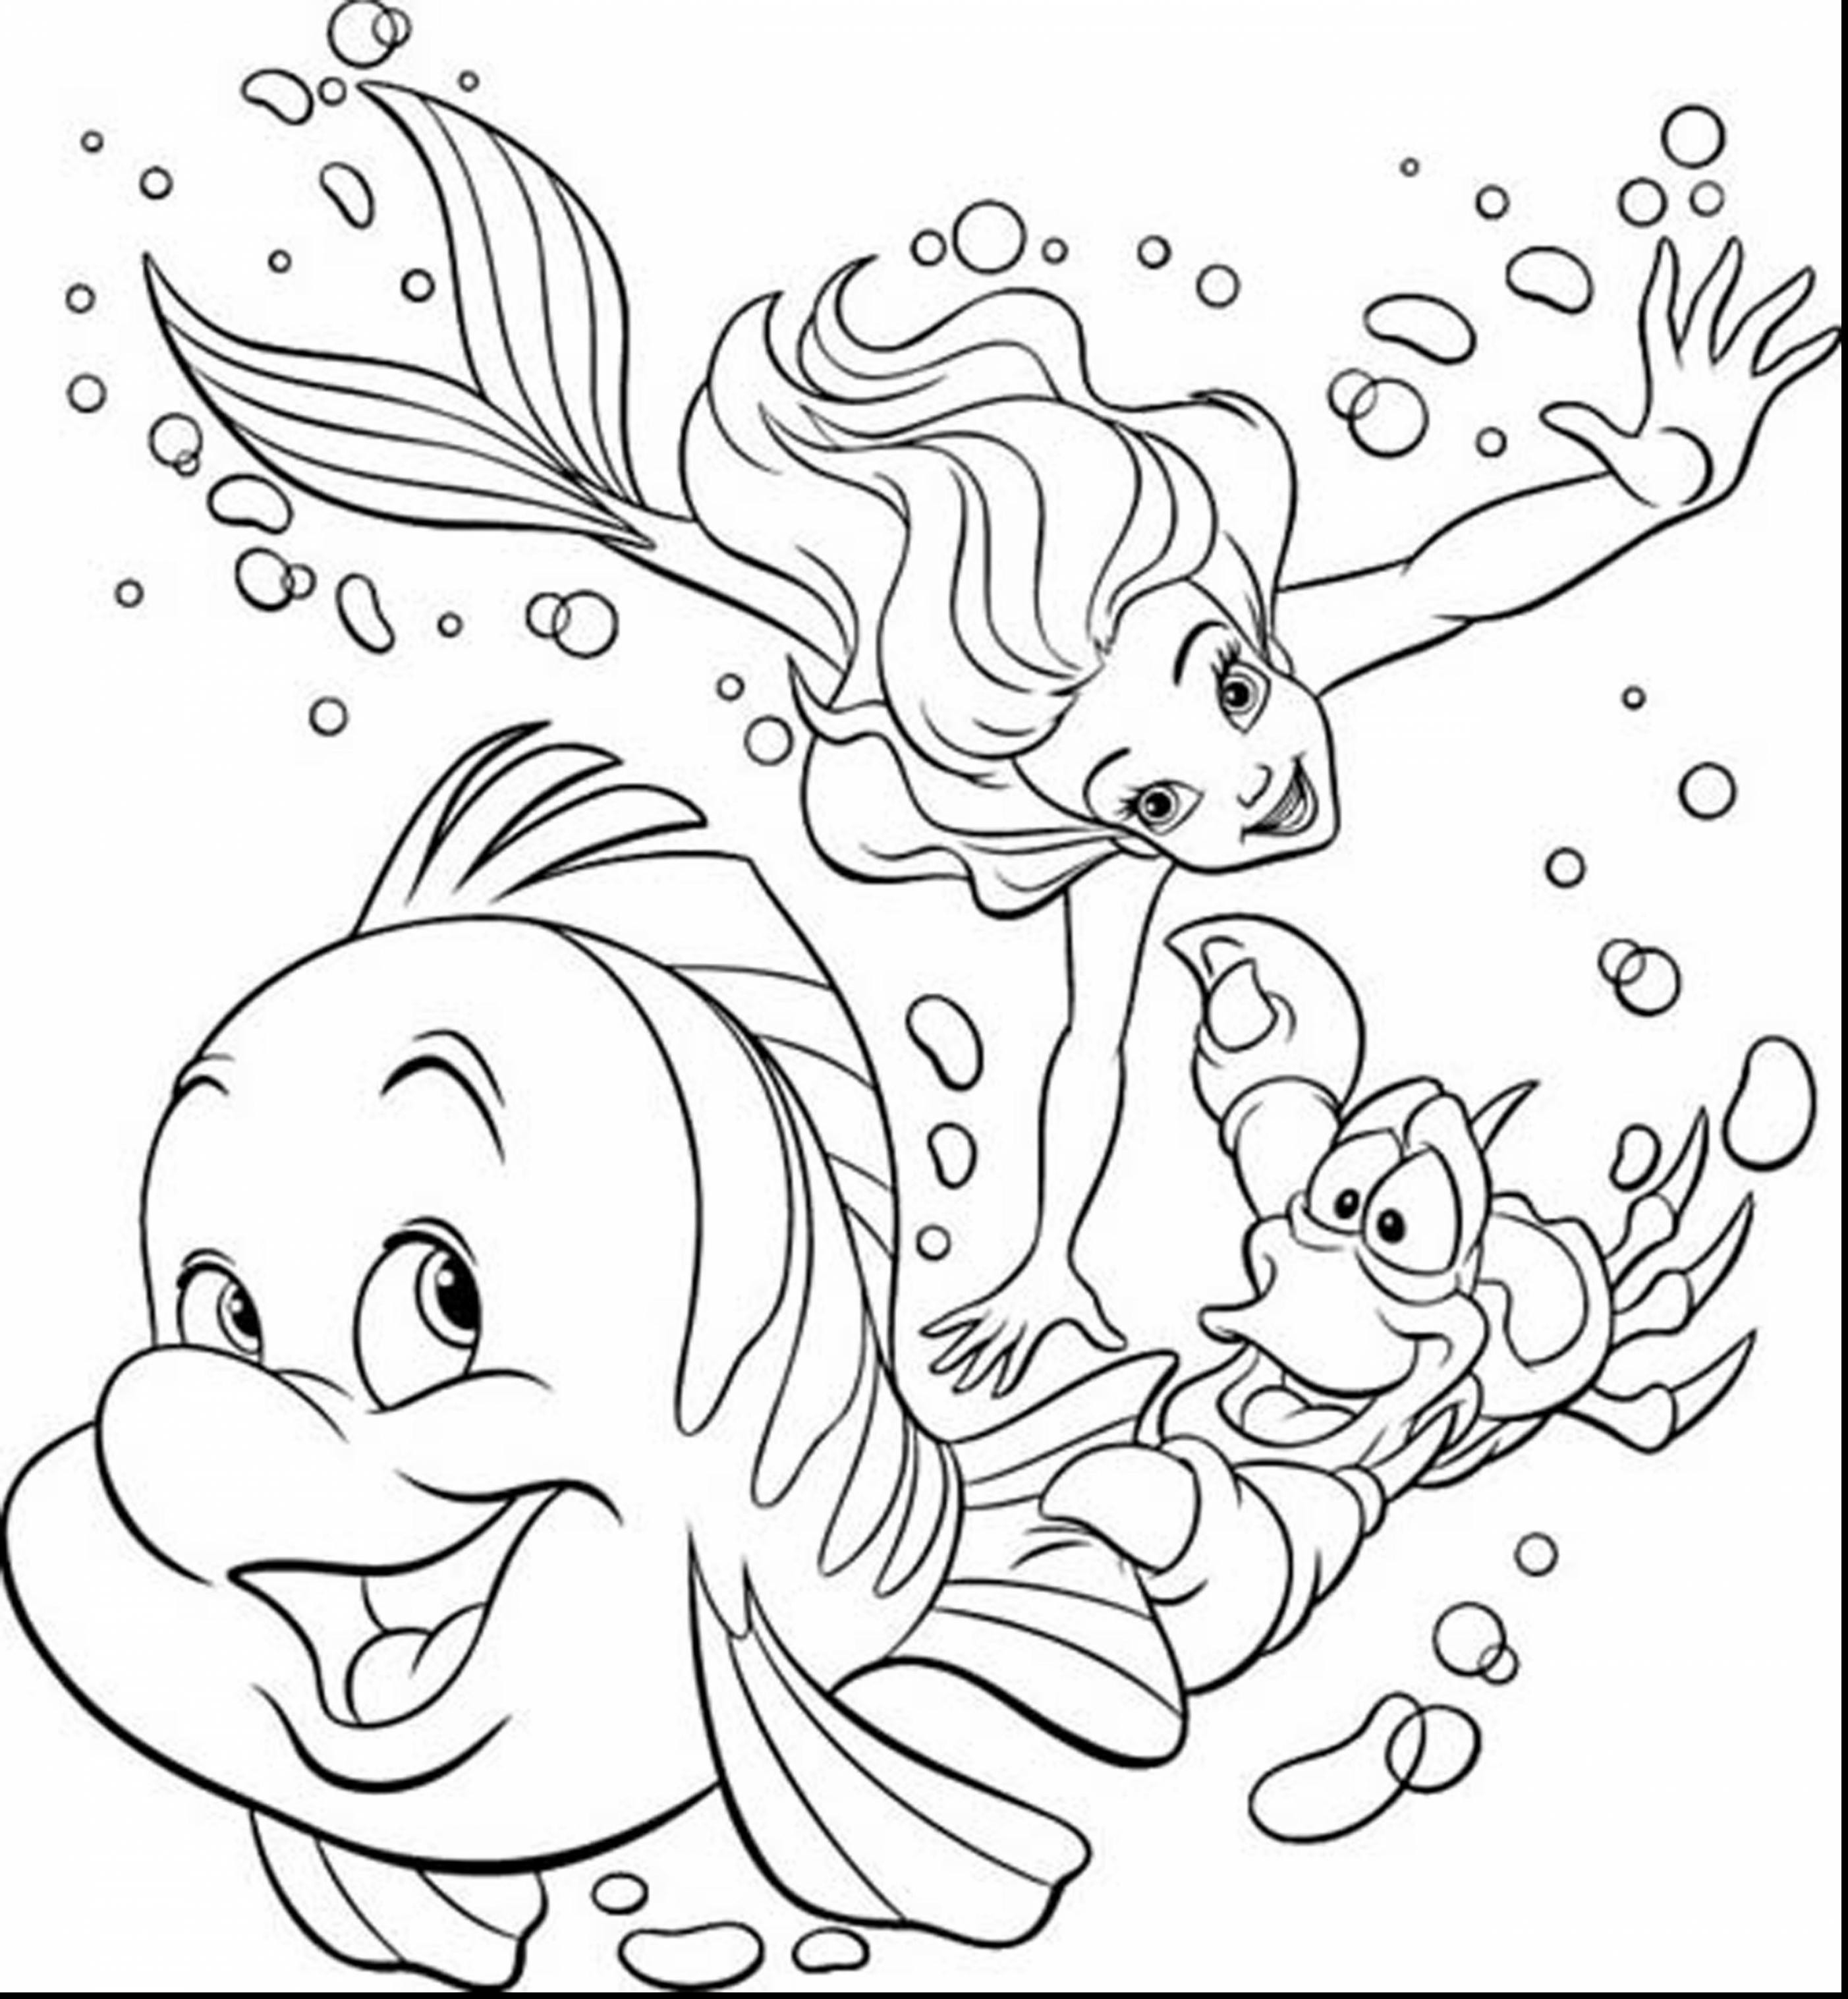 Coloring Pages : Freerint Coloringages Disney Arielfree To Castle - Free Printable Disney Coloring Pages